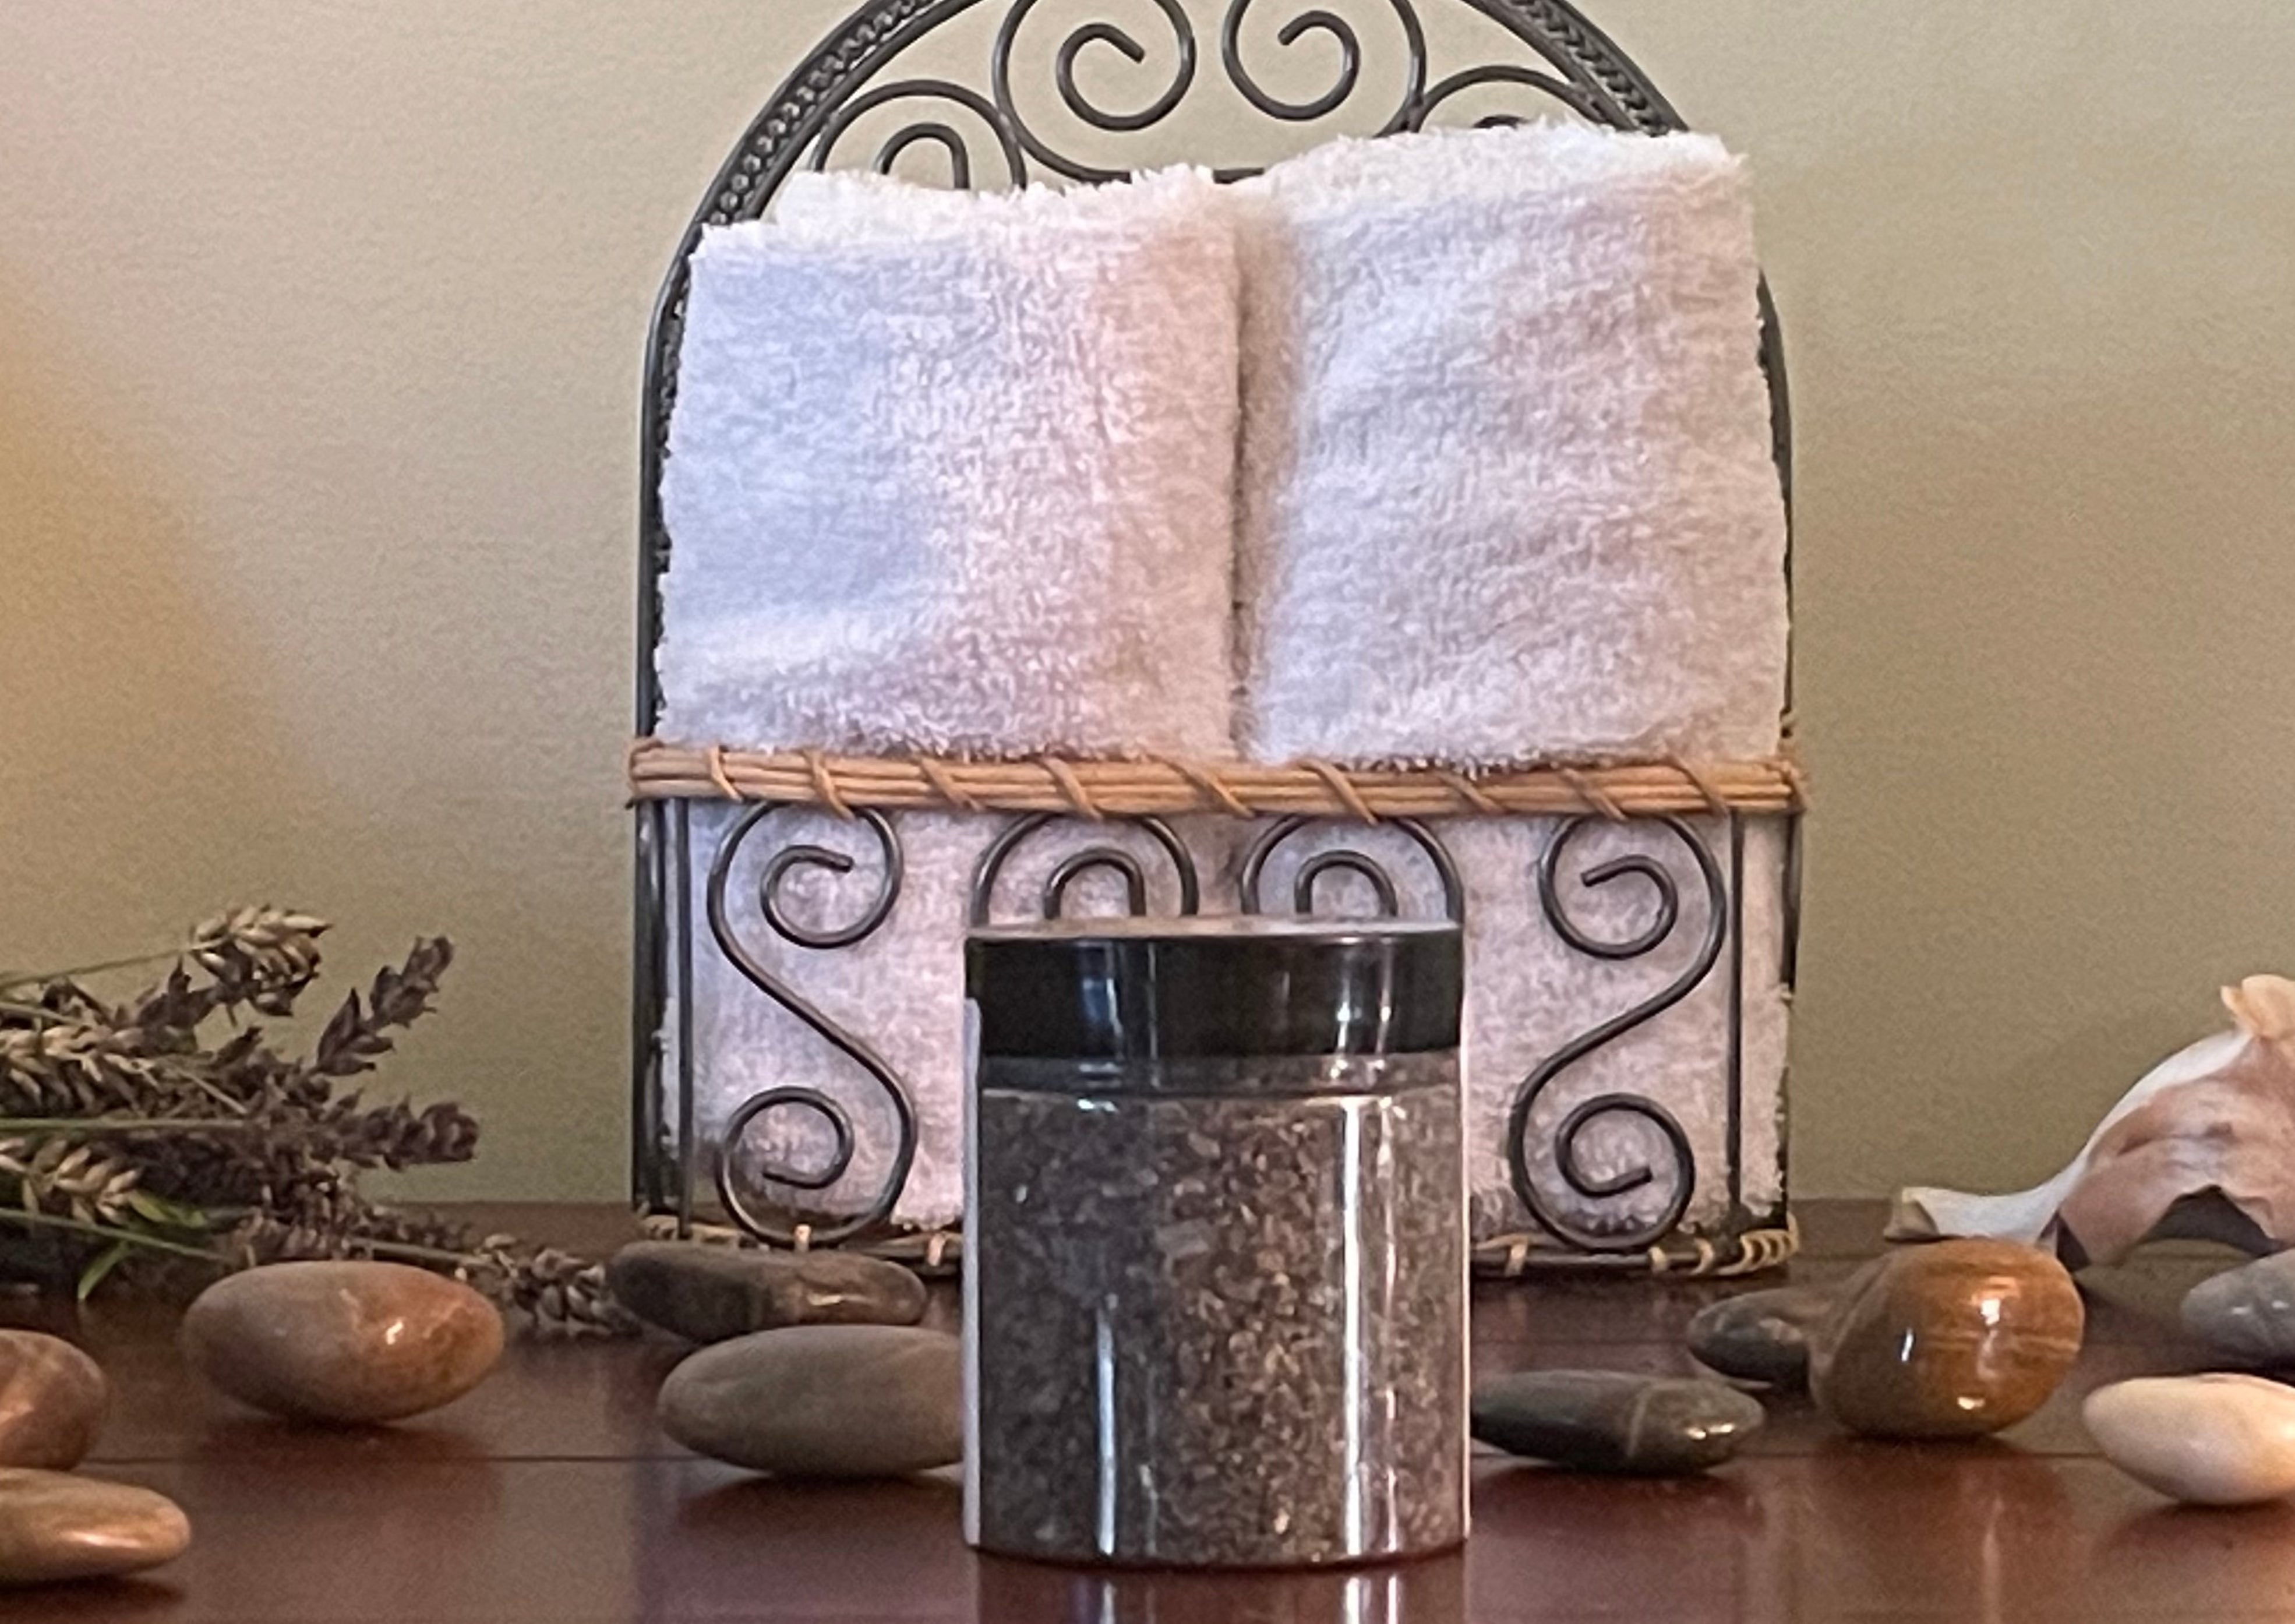 Black colored bath salts in a clear jar that has a black colored lid.